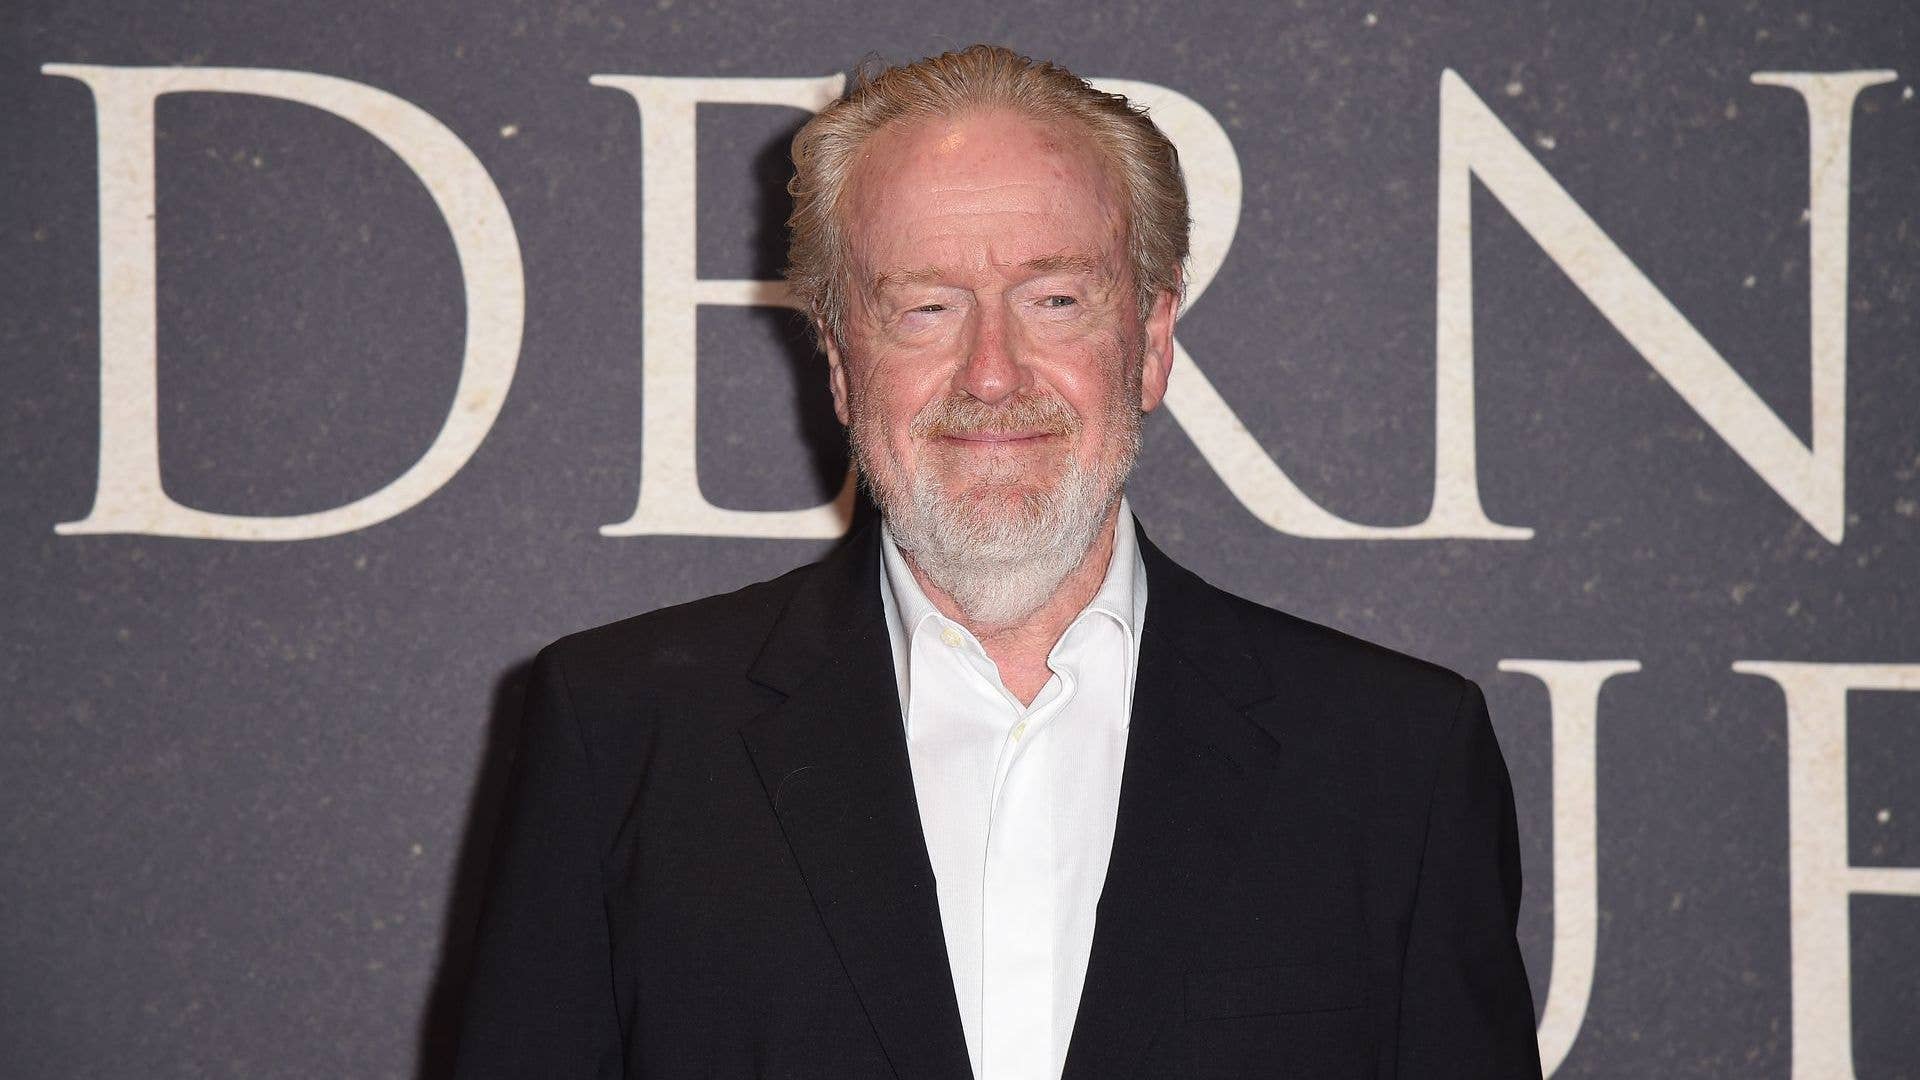 Ridley Scott at 'The Last Duel' premiere.